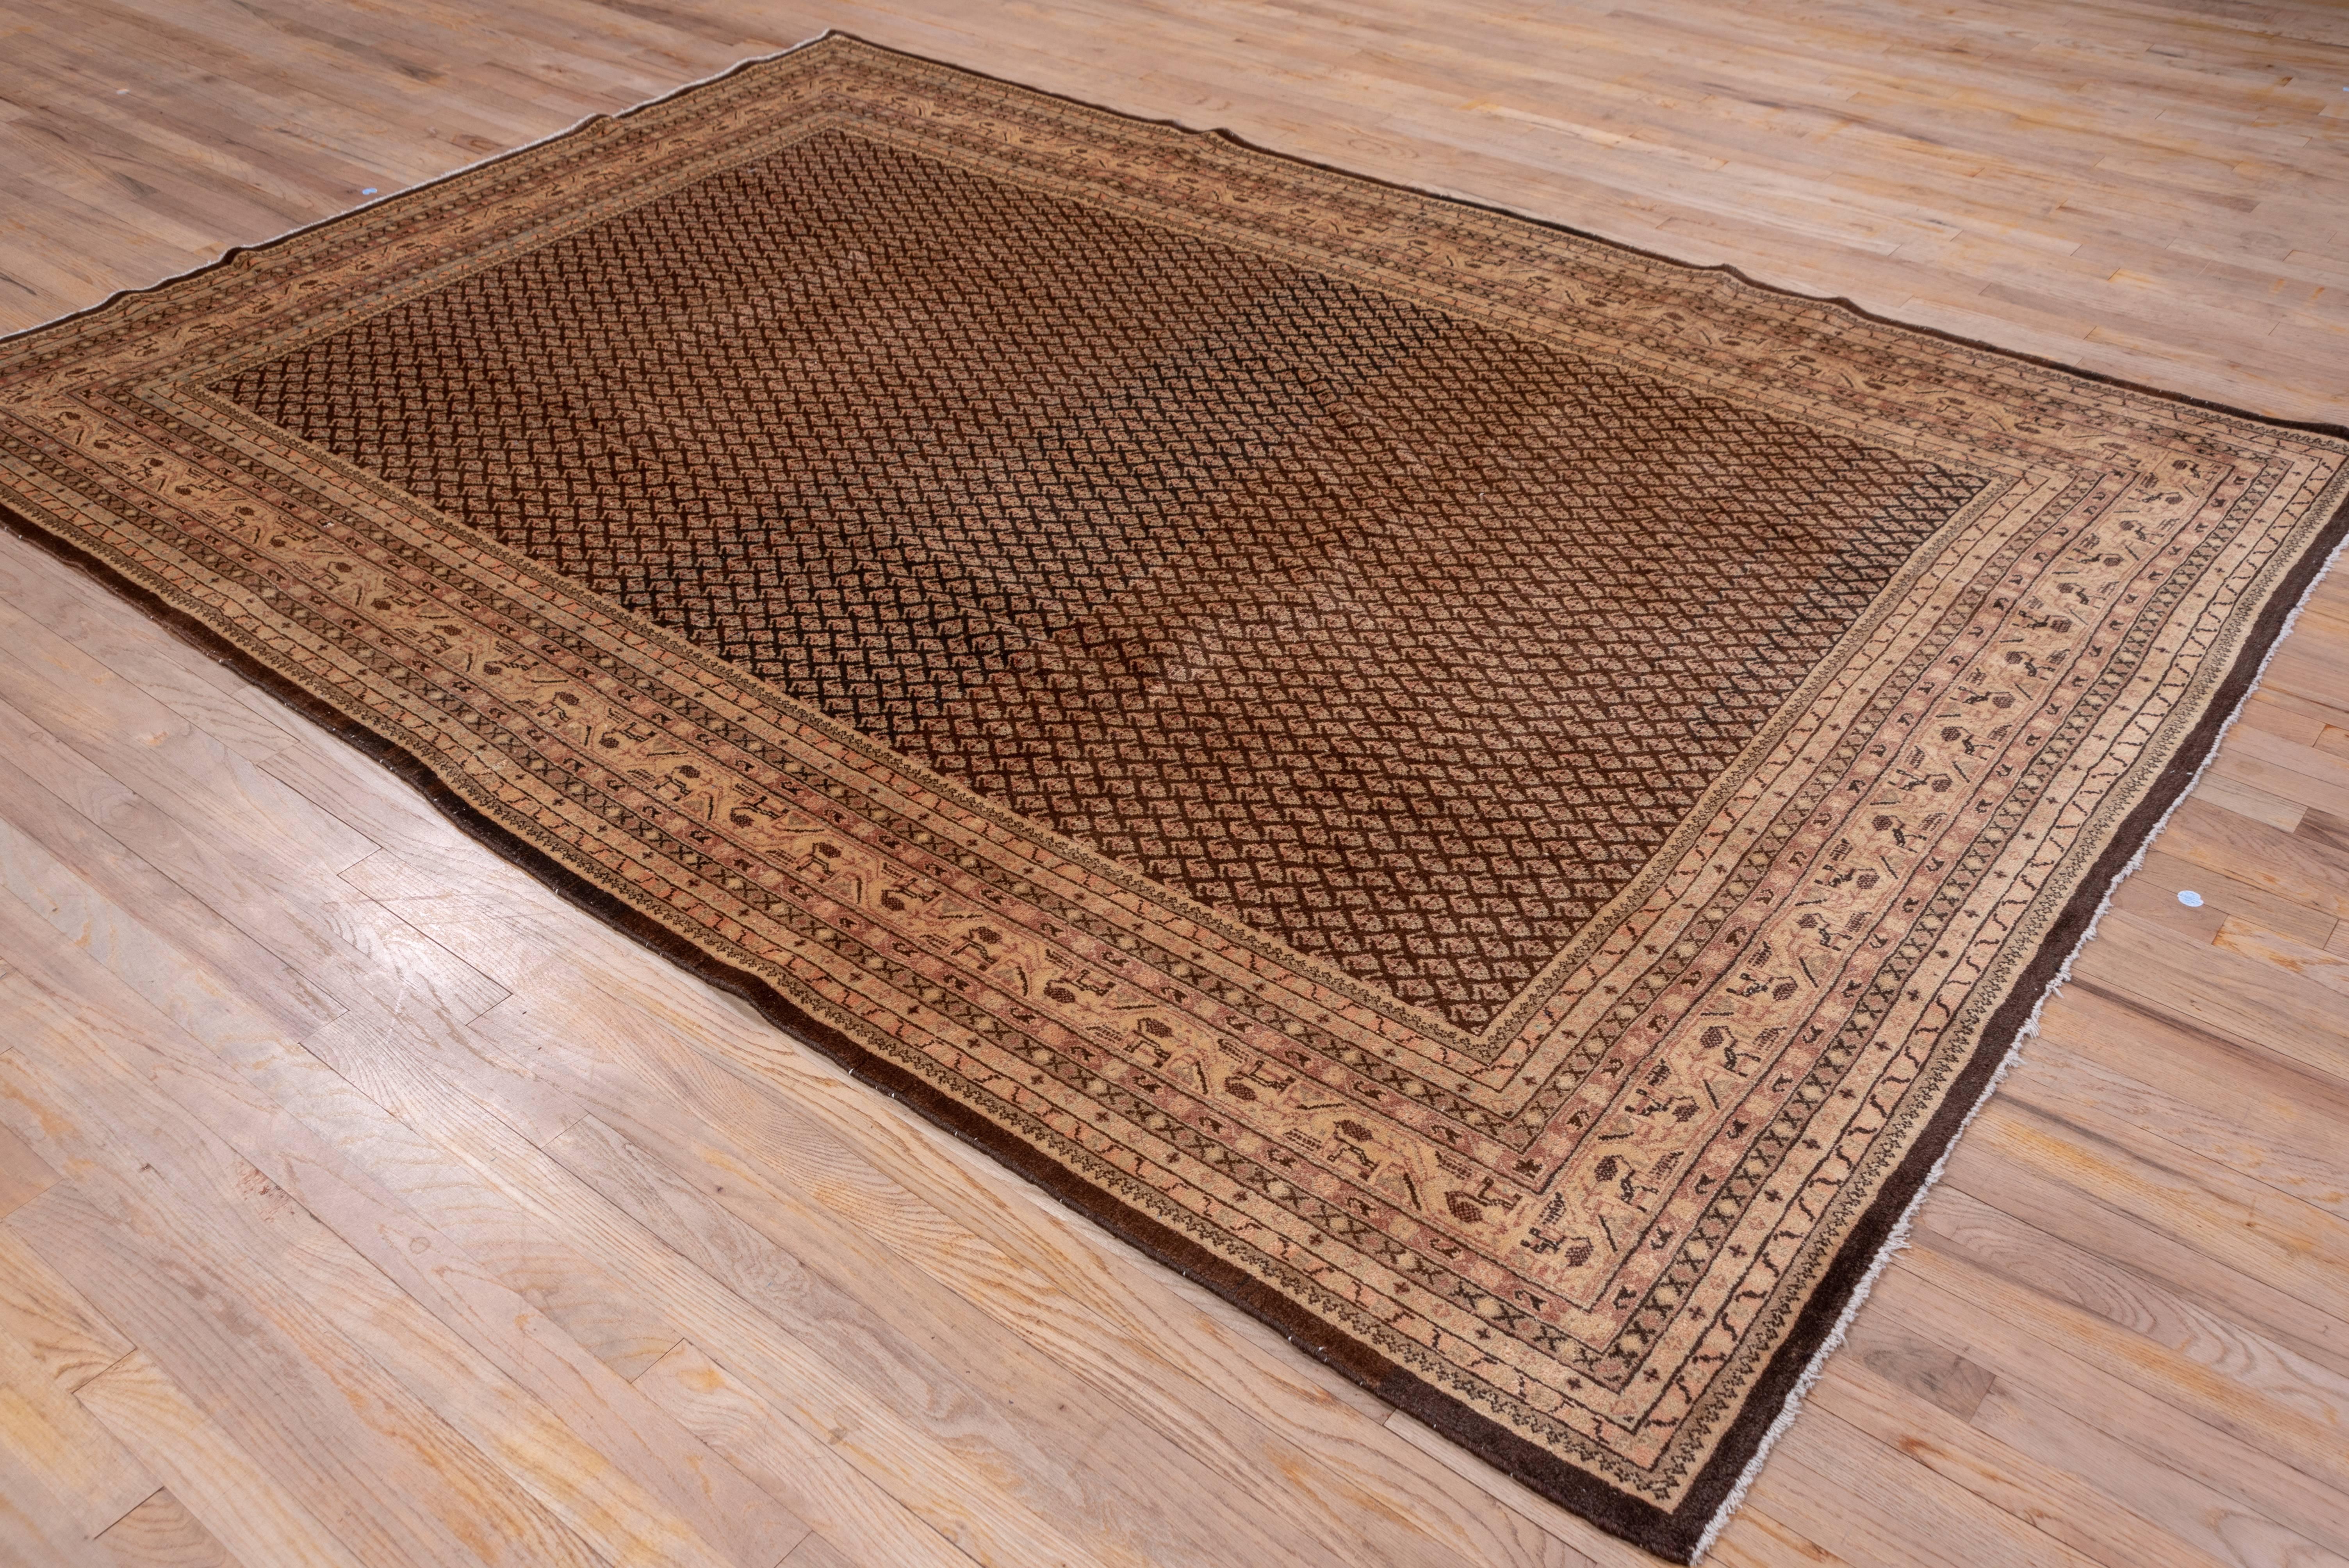 Vintage Persian Sarouk Carpet, Brown Allover Field, circa 1940s In Excellent Condition For Sale In New York, NY